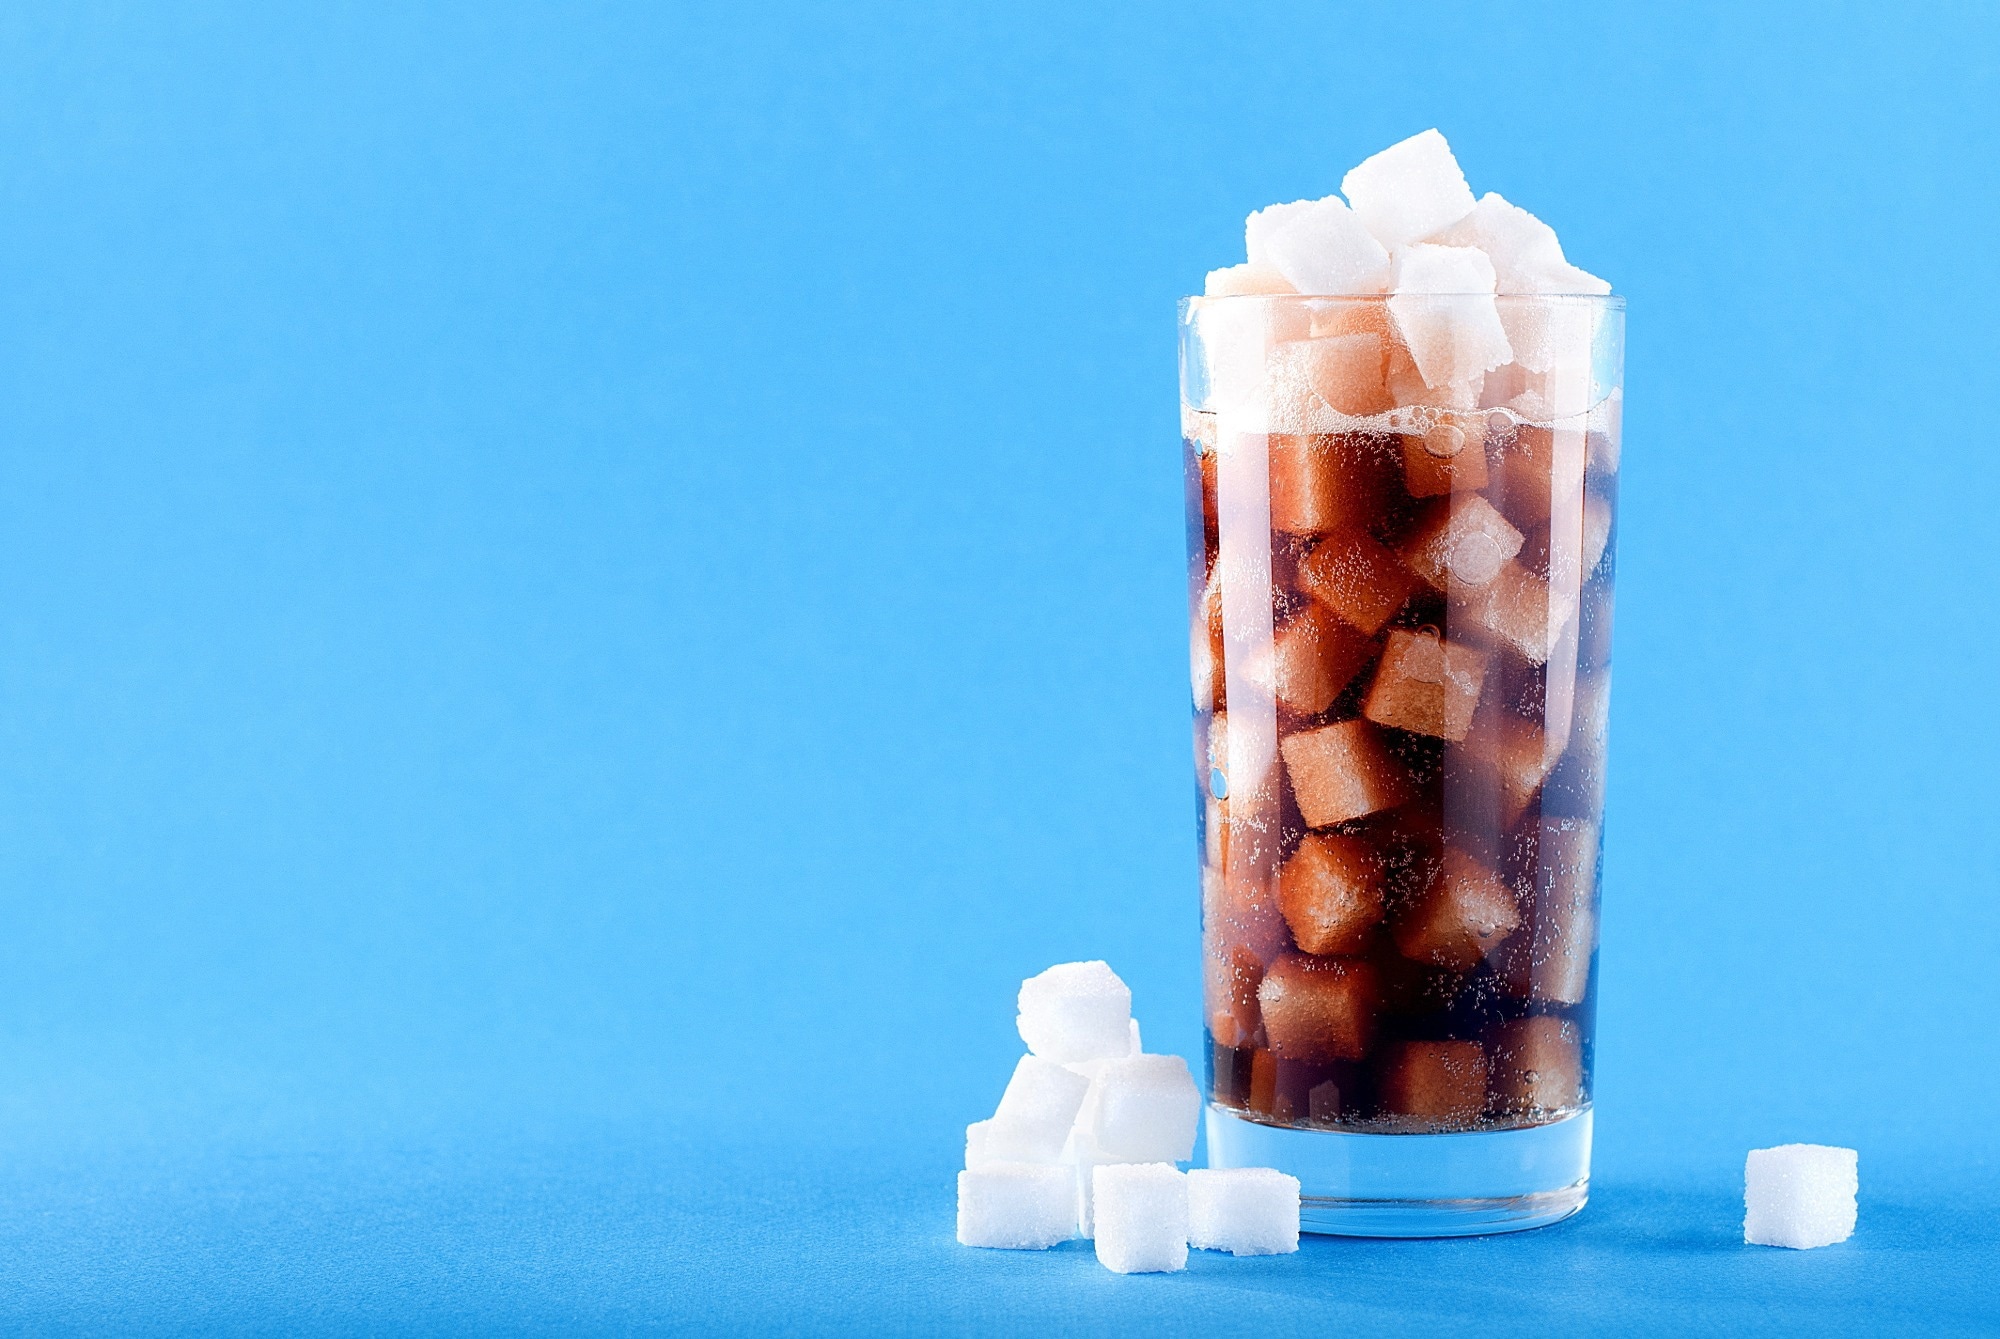 Original Research Article: Sugar-sweetened beverage consumption and weight gain in children and adults: a systematic review and meta-analysis of prospective cohort studies and randomized controlled trials. Image Credit: Valerii__Dex / Shutterstock